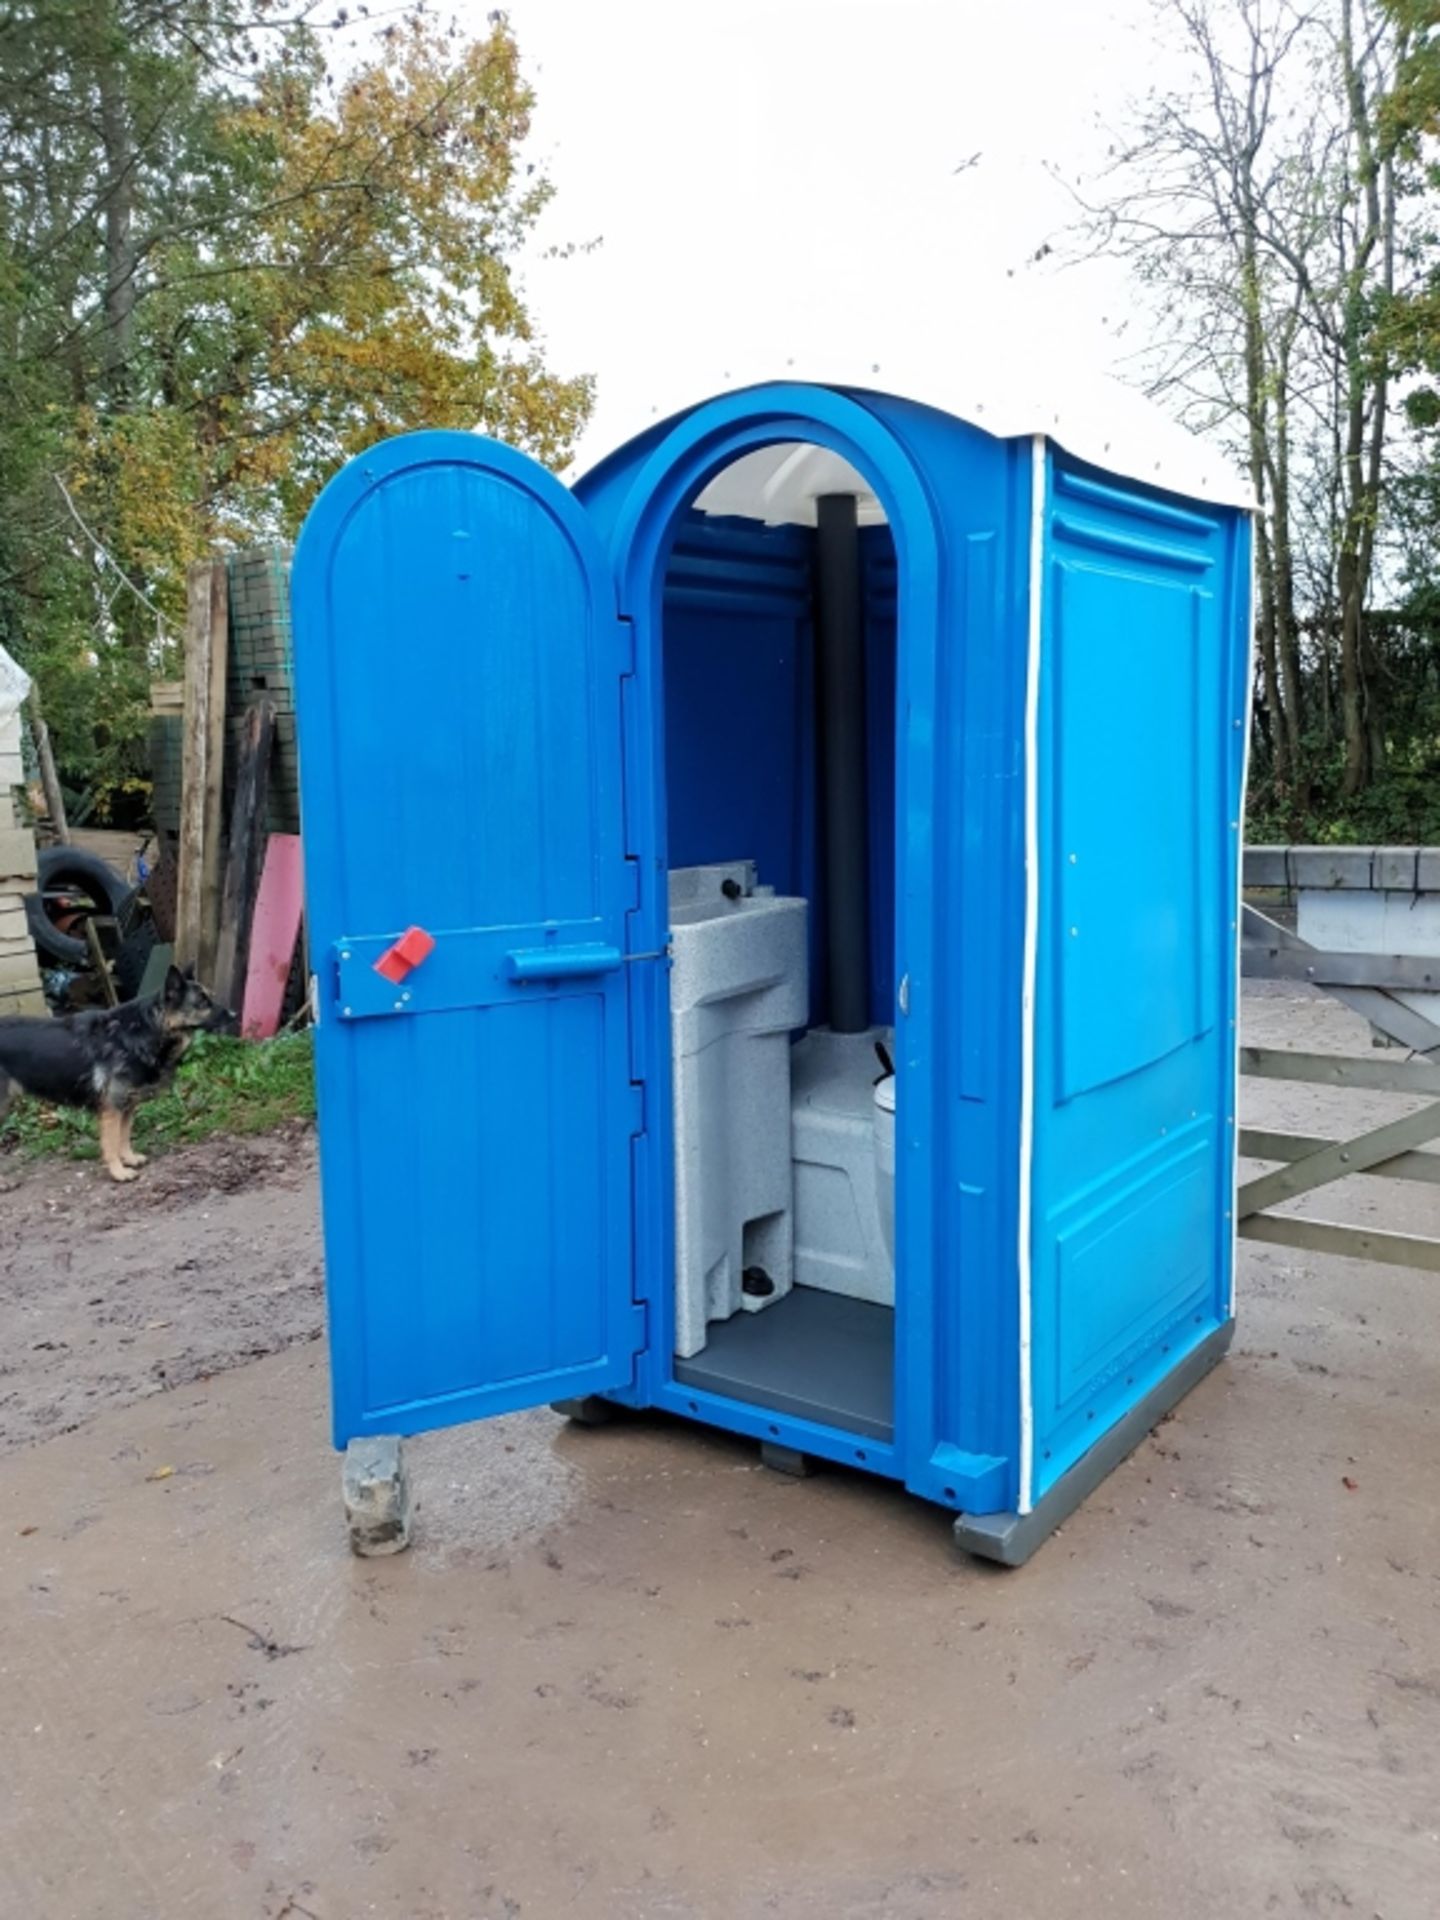 Portable Site Toilet - Image 4 of 4